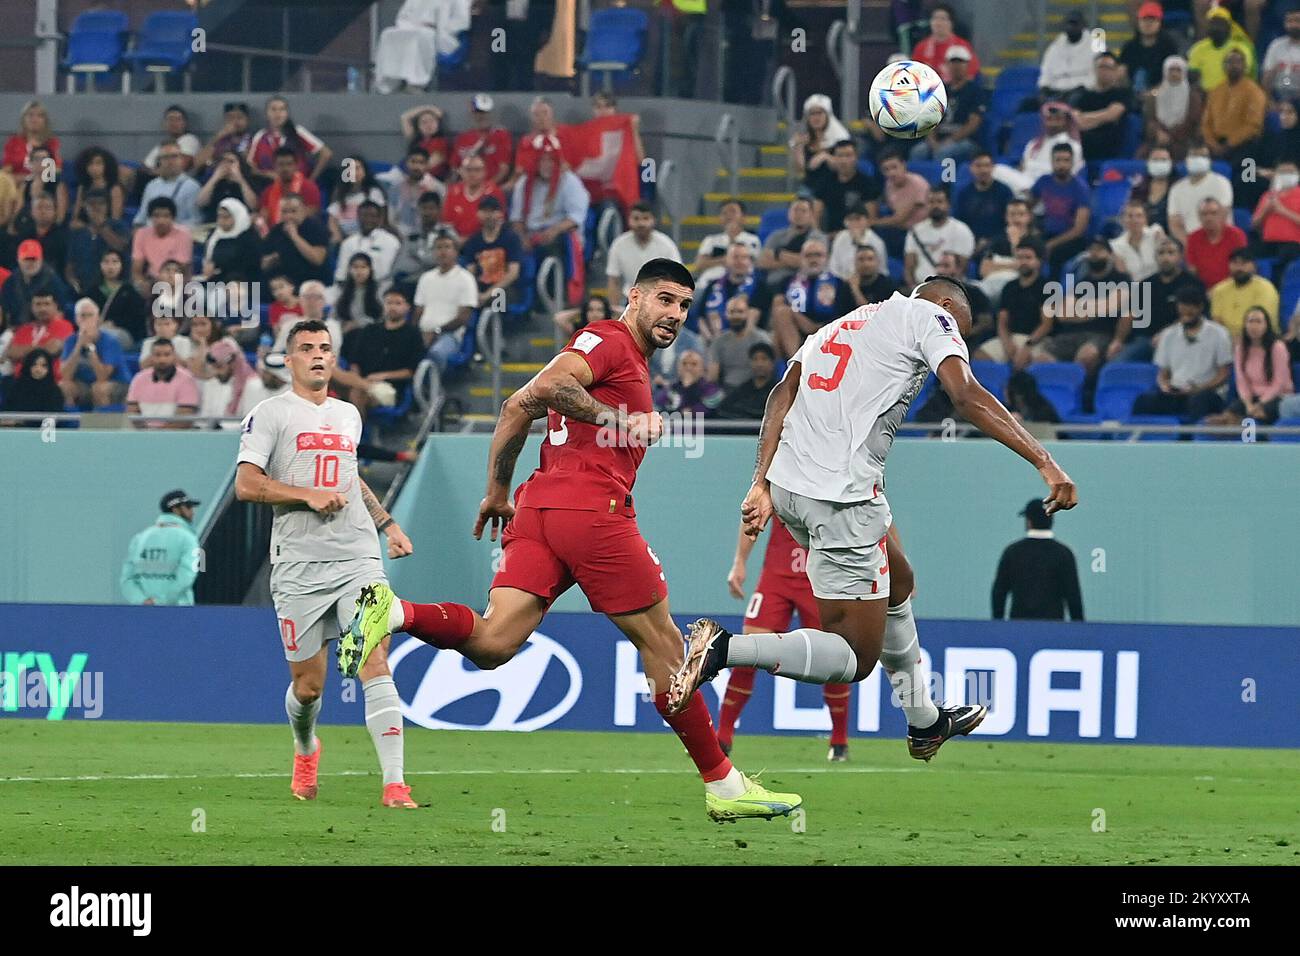 Qatar. 02nd Dec, 2022. goal 1-1 MITROVIC Aleksandar (SRB), header, action, duels versus Manuel AKANJI (SUI), Serbia (SRB) - Switzerland (SUI), group phase group G, game 47 on December 2nd, 2022, Stadium 974, Football World Cup 2022 in Qatar from 20.11. - 18.12.2022 ? Credit: dpa picture alliance/Alamy Live News Stock Photo